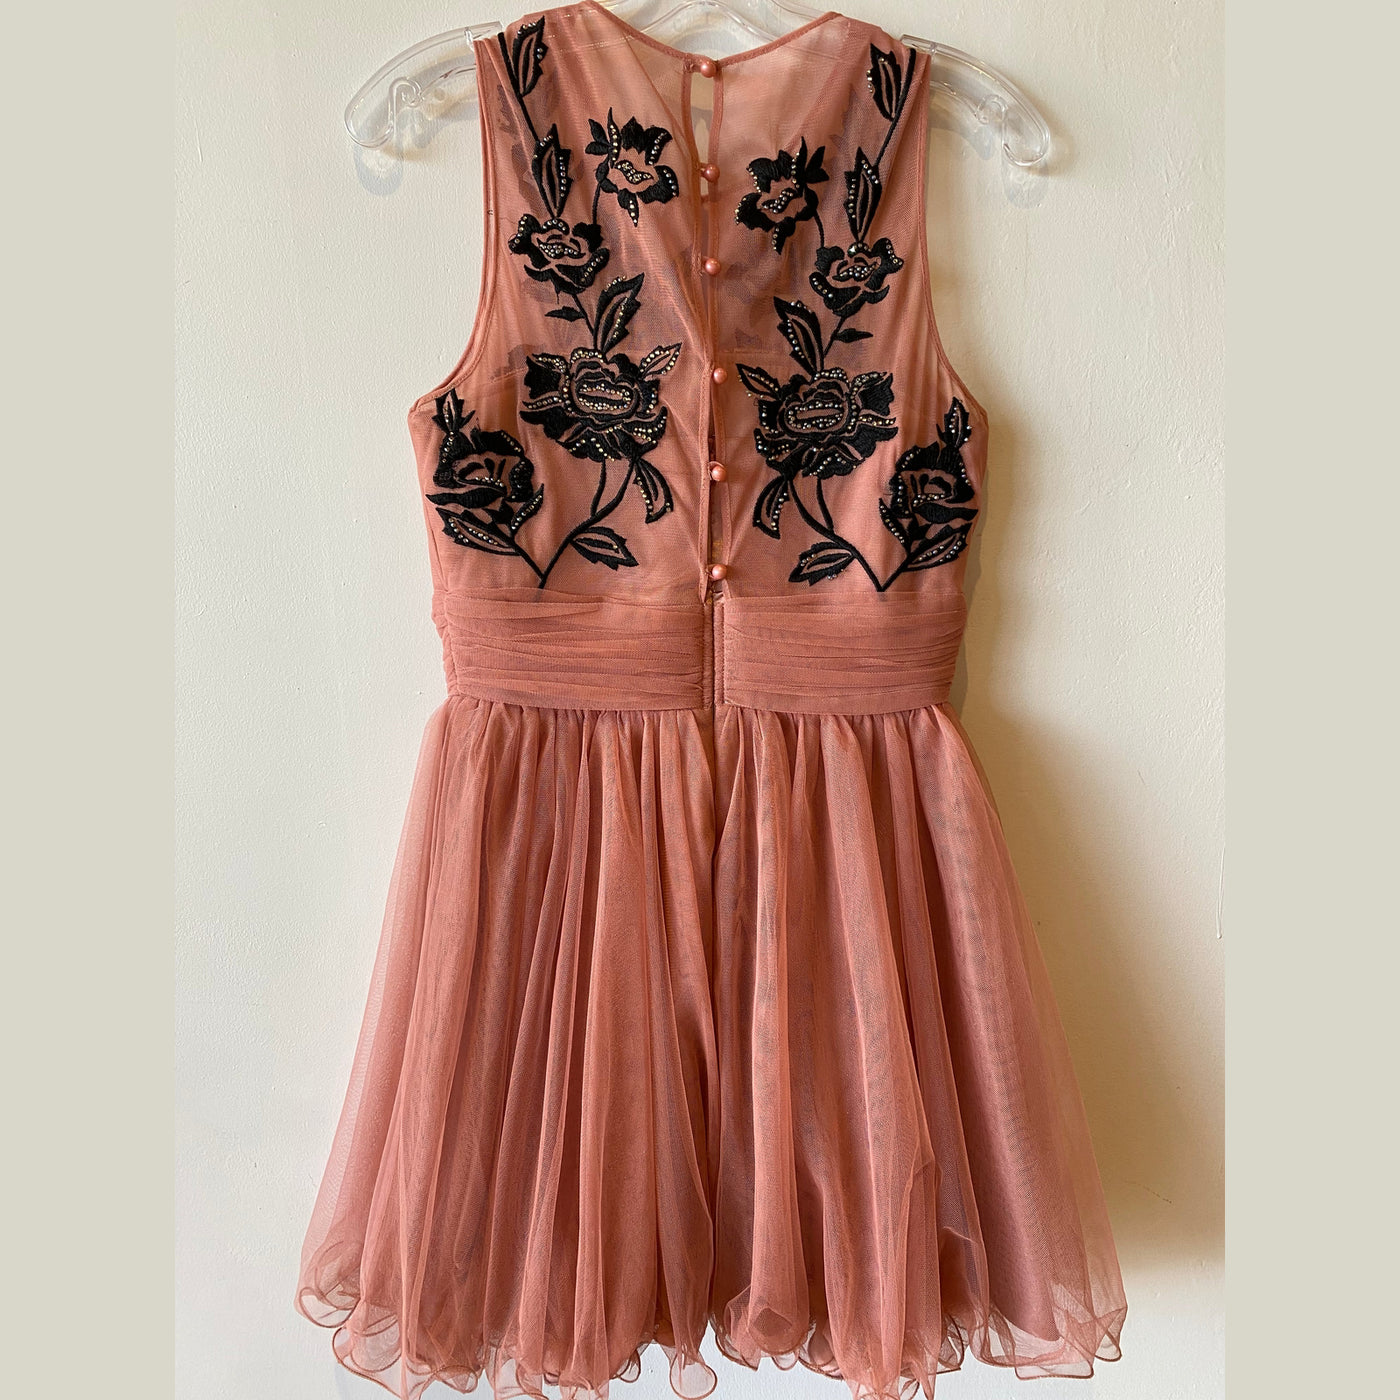 Pink Chiffon Prom Dress with Black Embroidered Flowers